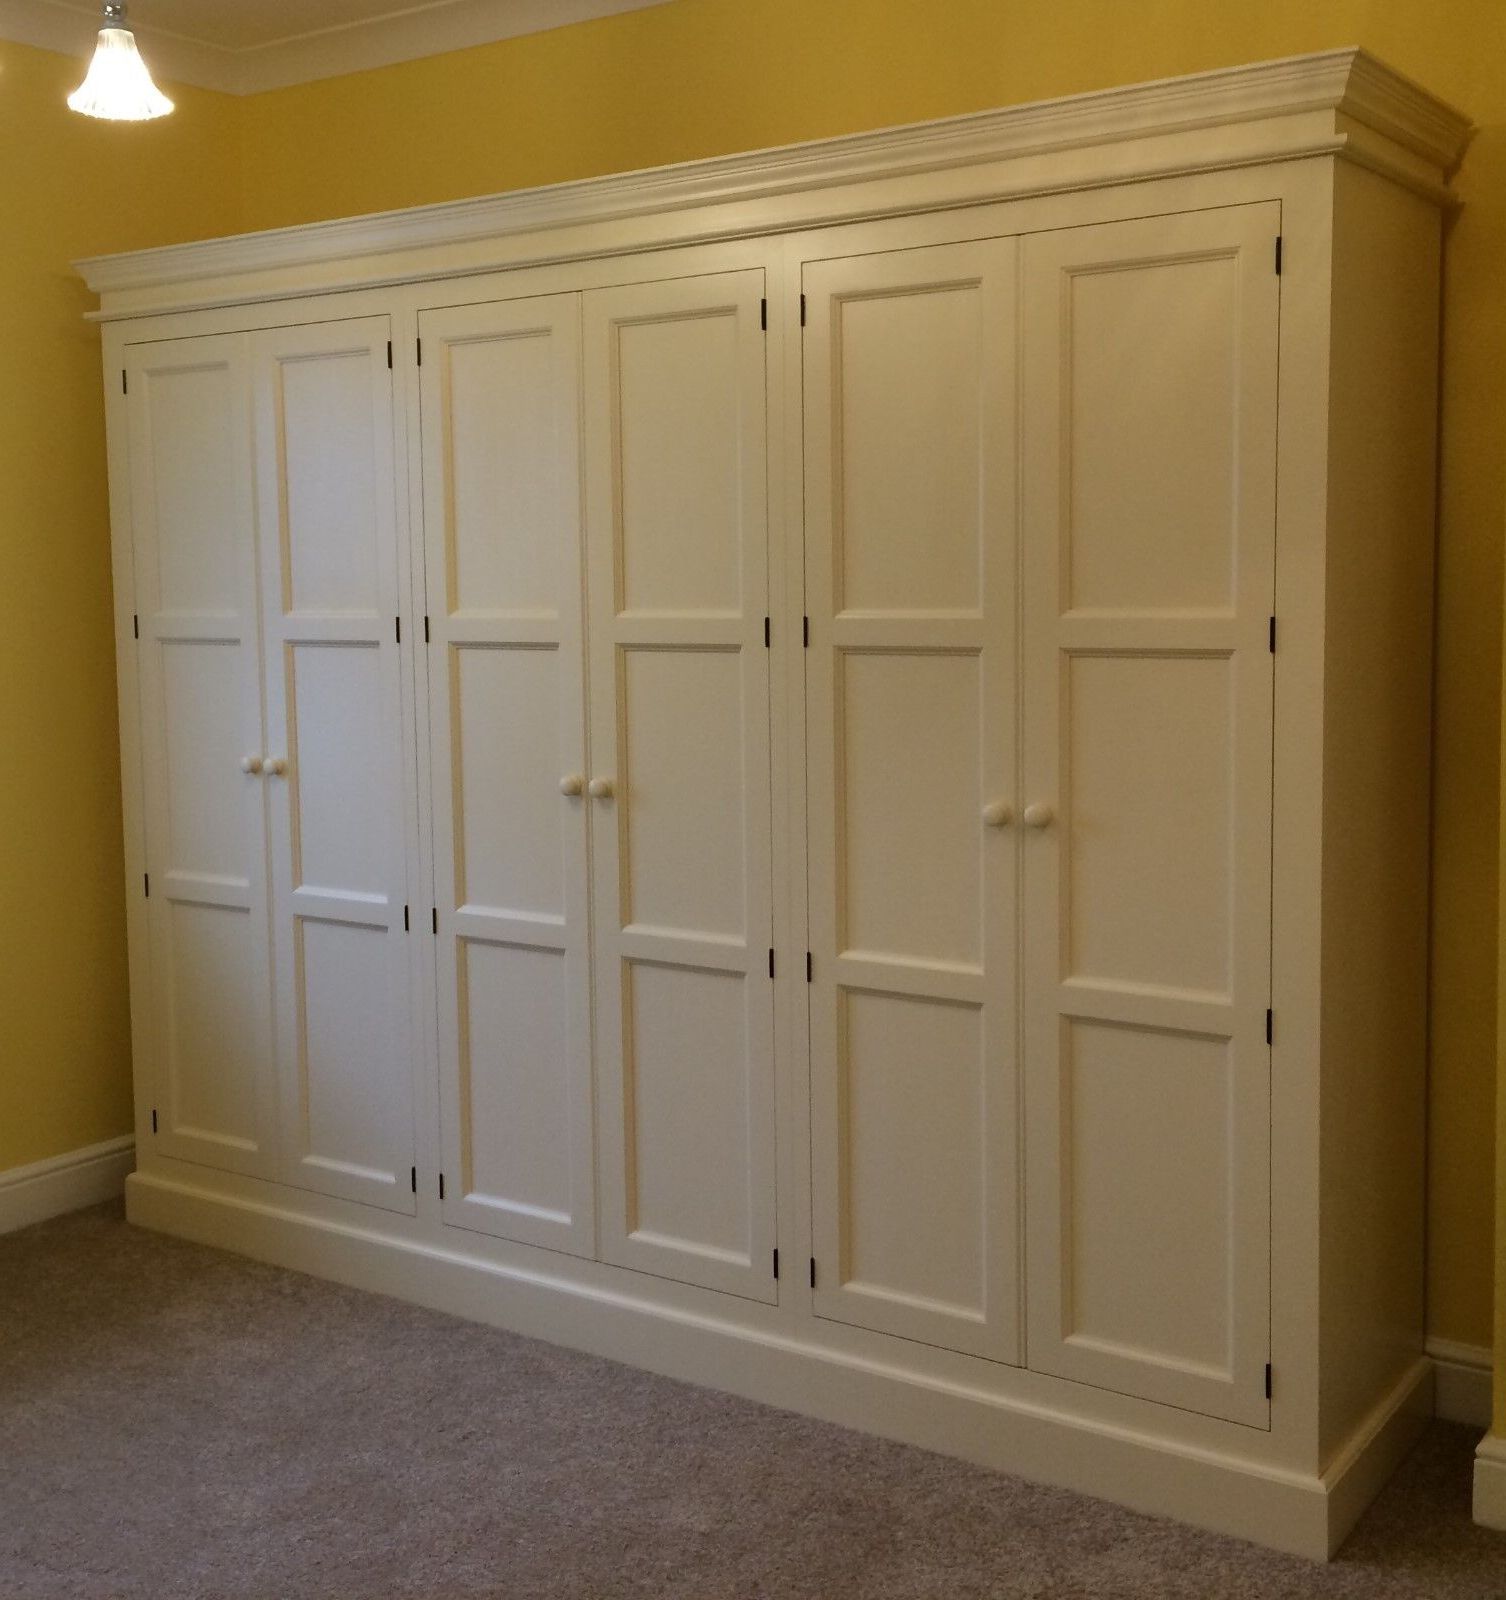 Wardrobe – Painted 6 Door Wardrobe Full Hanging – Triple Panel With Plinth  Style | Ebay With 6 Door Wardrobes (View 8 of 20)